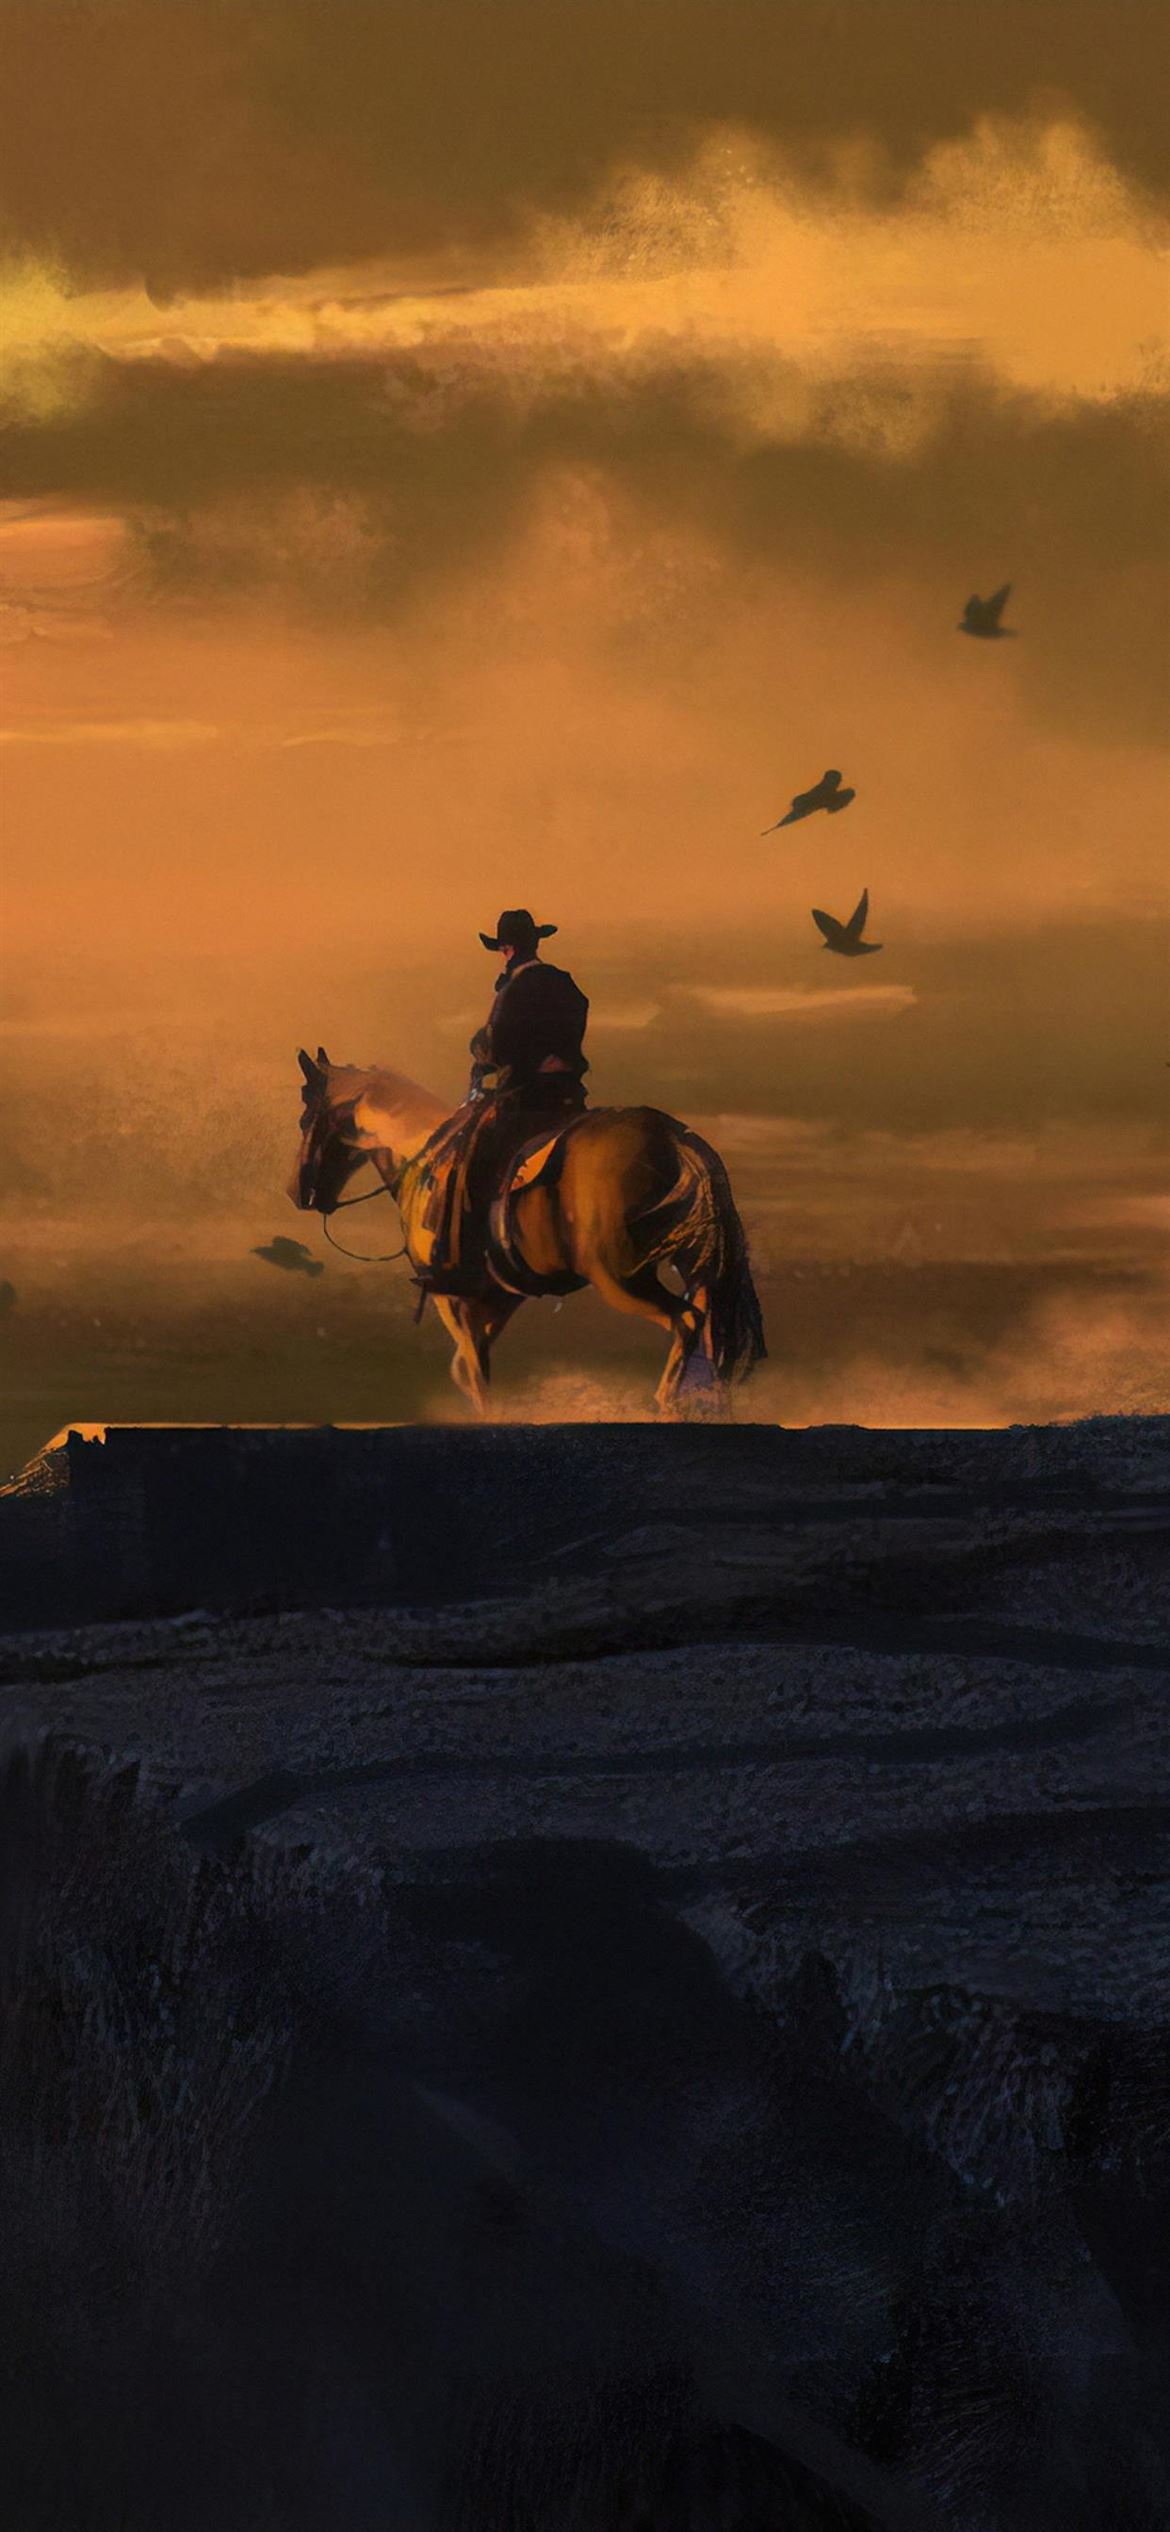 iphone xs max red dead redemption 2 image